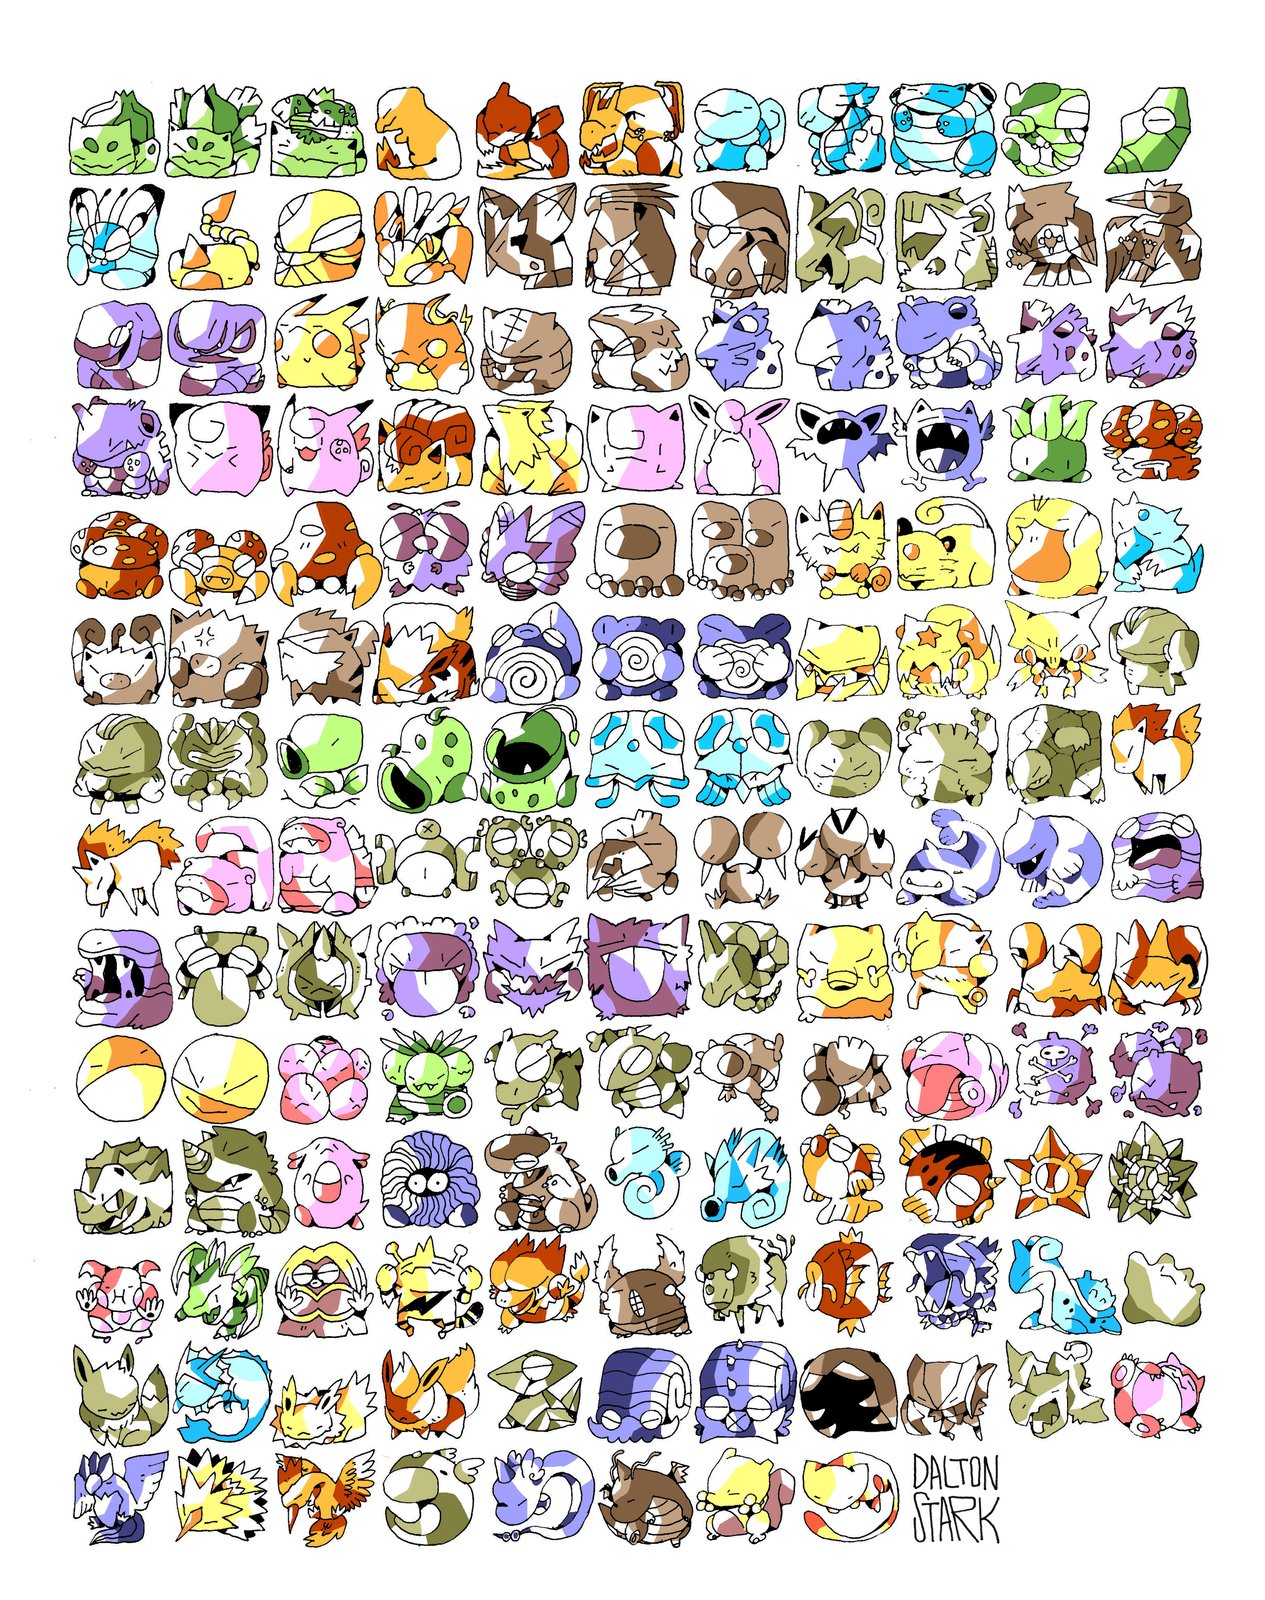 https://assets.bigcartel.com/product_images/305268762/151pokemonposter.print.jpg?auto=format&fit=max